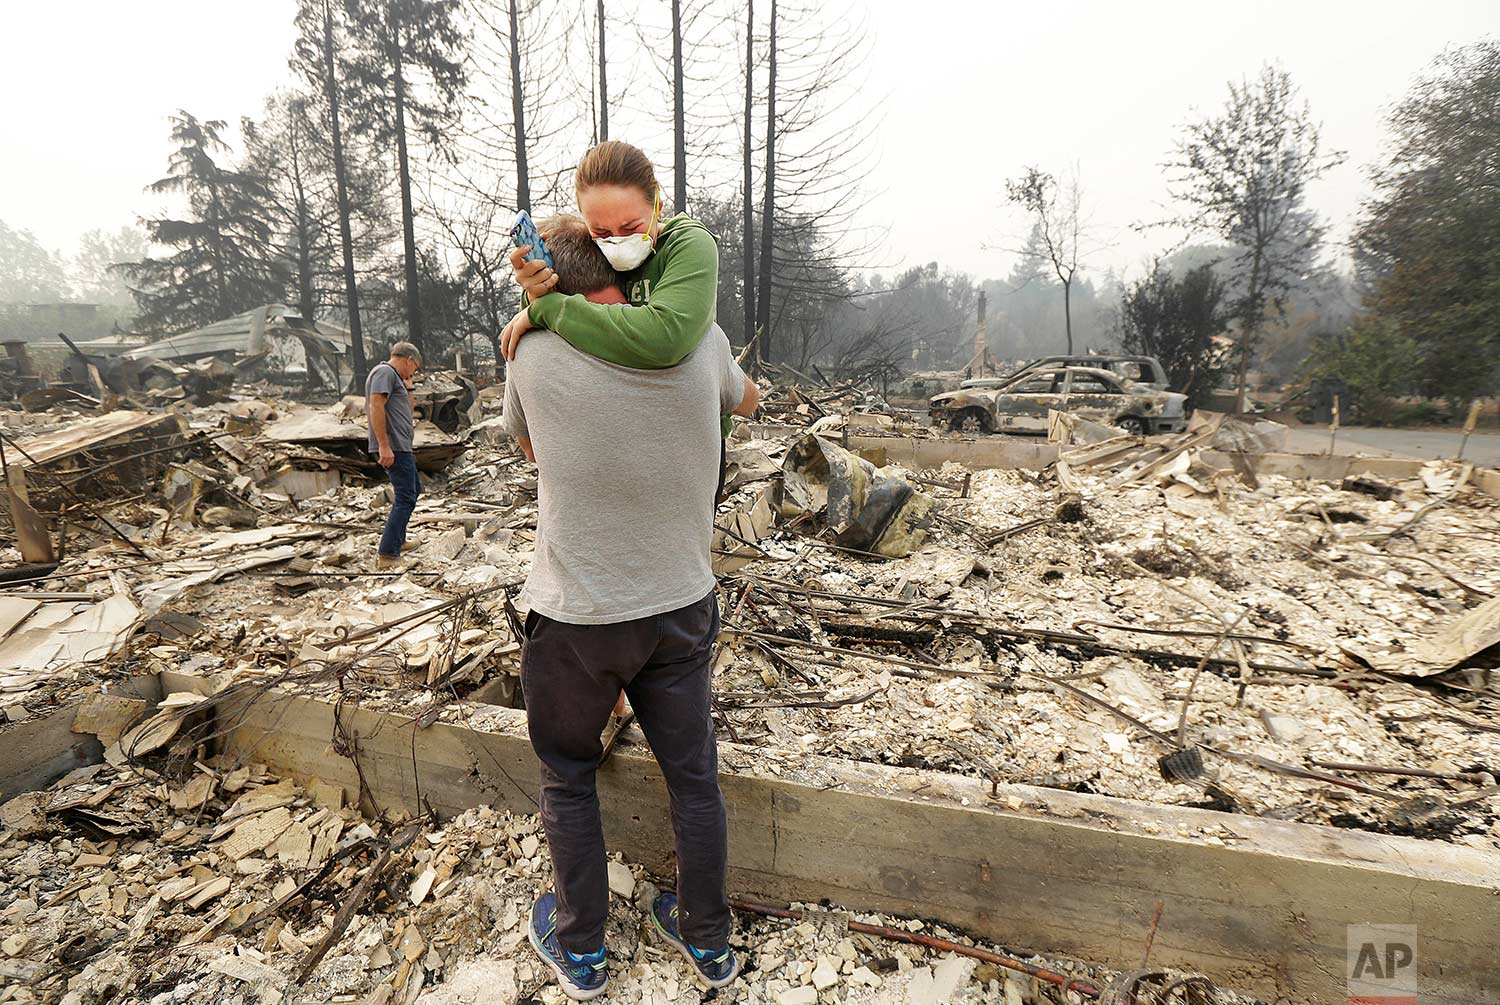  Todd Caughey hugs his daughter, Ella, on Tuesday, Oct. 10, 2017, as they visit the site of their home destroyed by fires in Kenwood, Calif. (AP Photo/Jeff Chiu) 